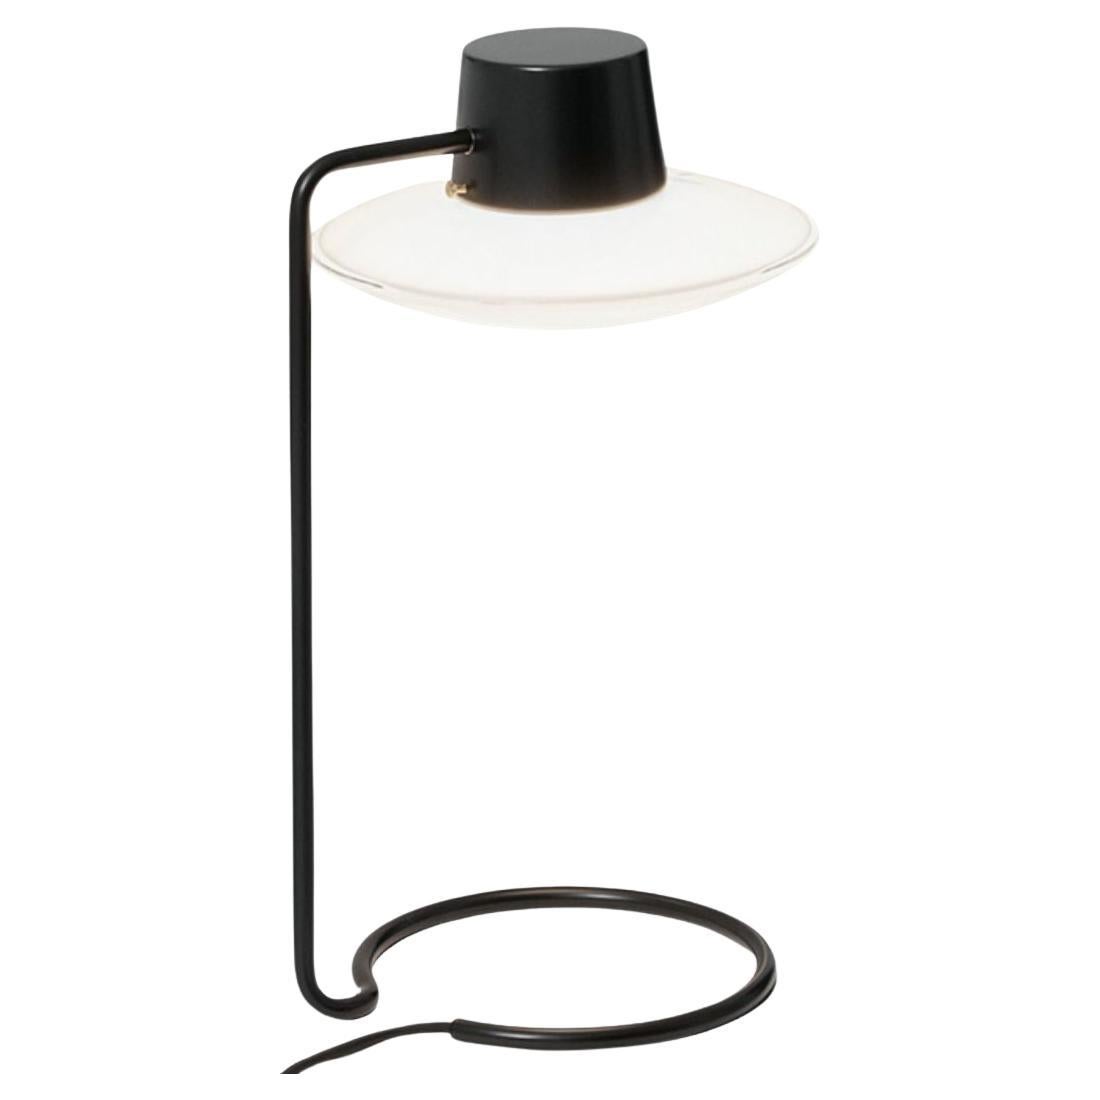 Arne Jacobsen 'AJ Oxford' Pin Mounted Table Lamp in Opal Glass for Louis Poulsen For Sale 2